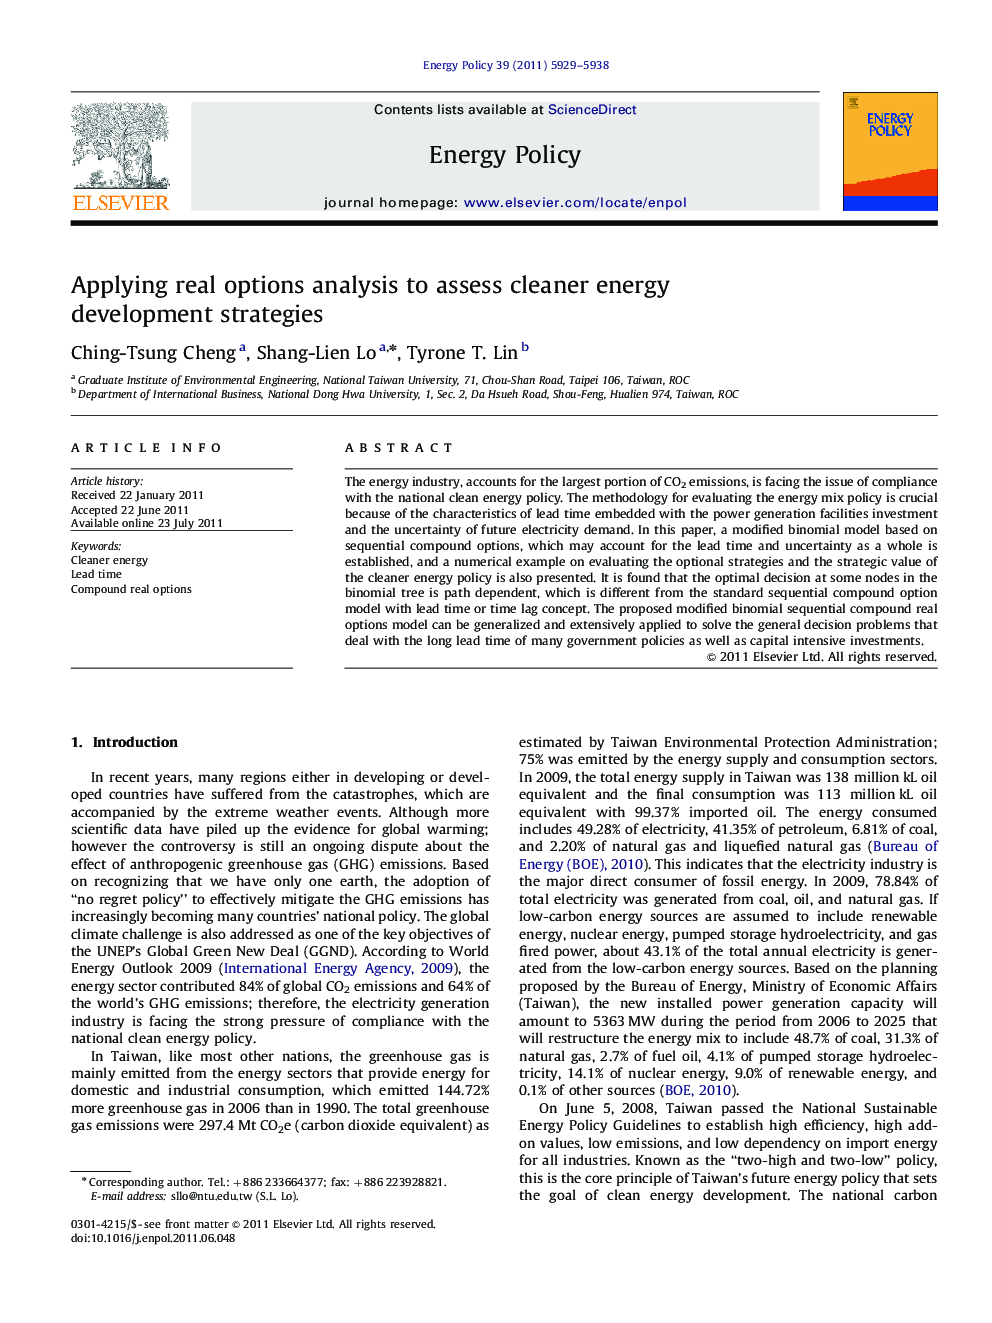 Applying real options analysis to assess cleaner energy development strategies